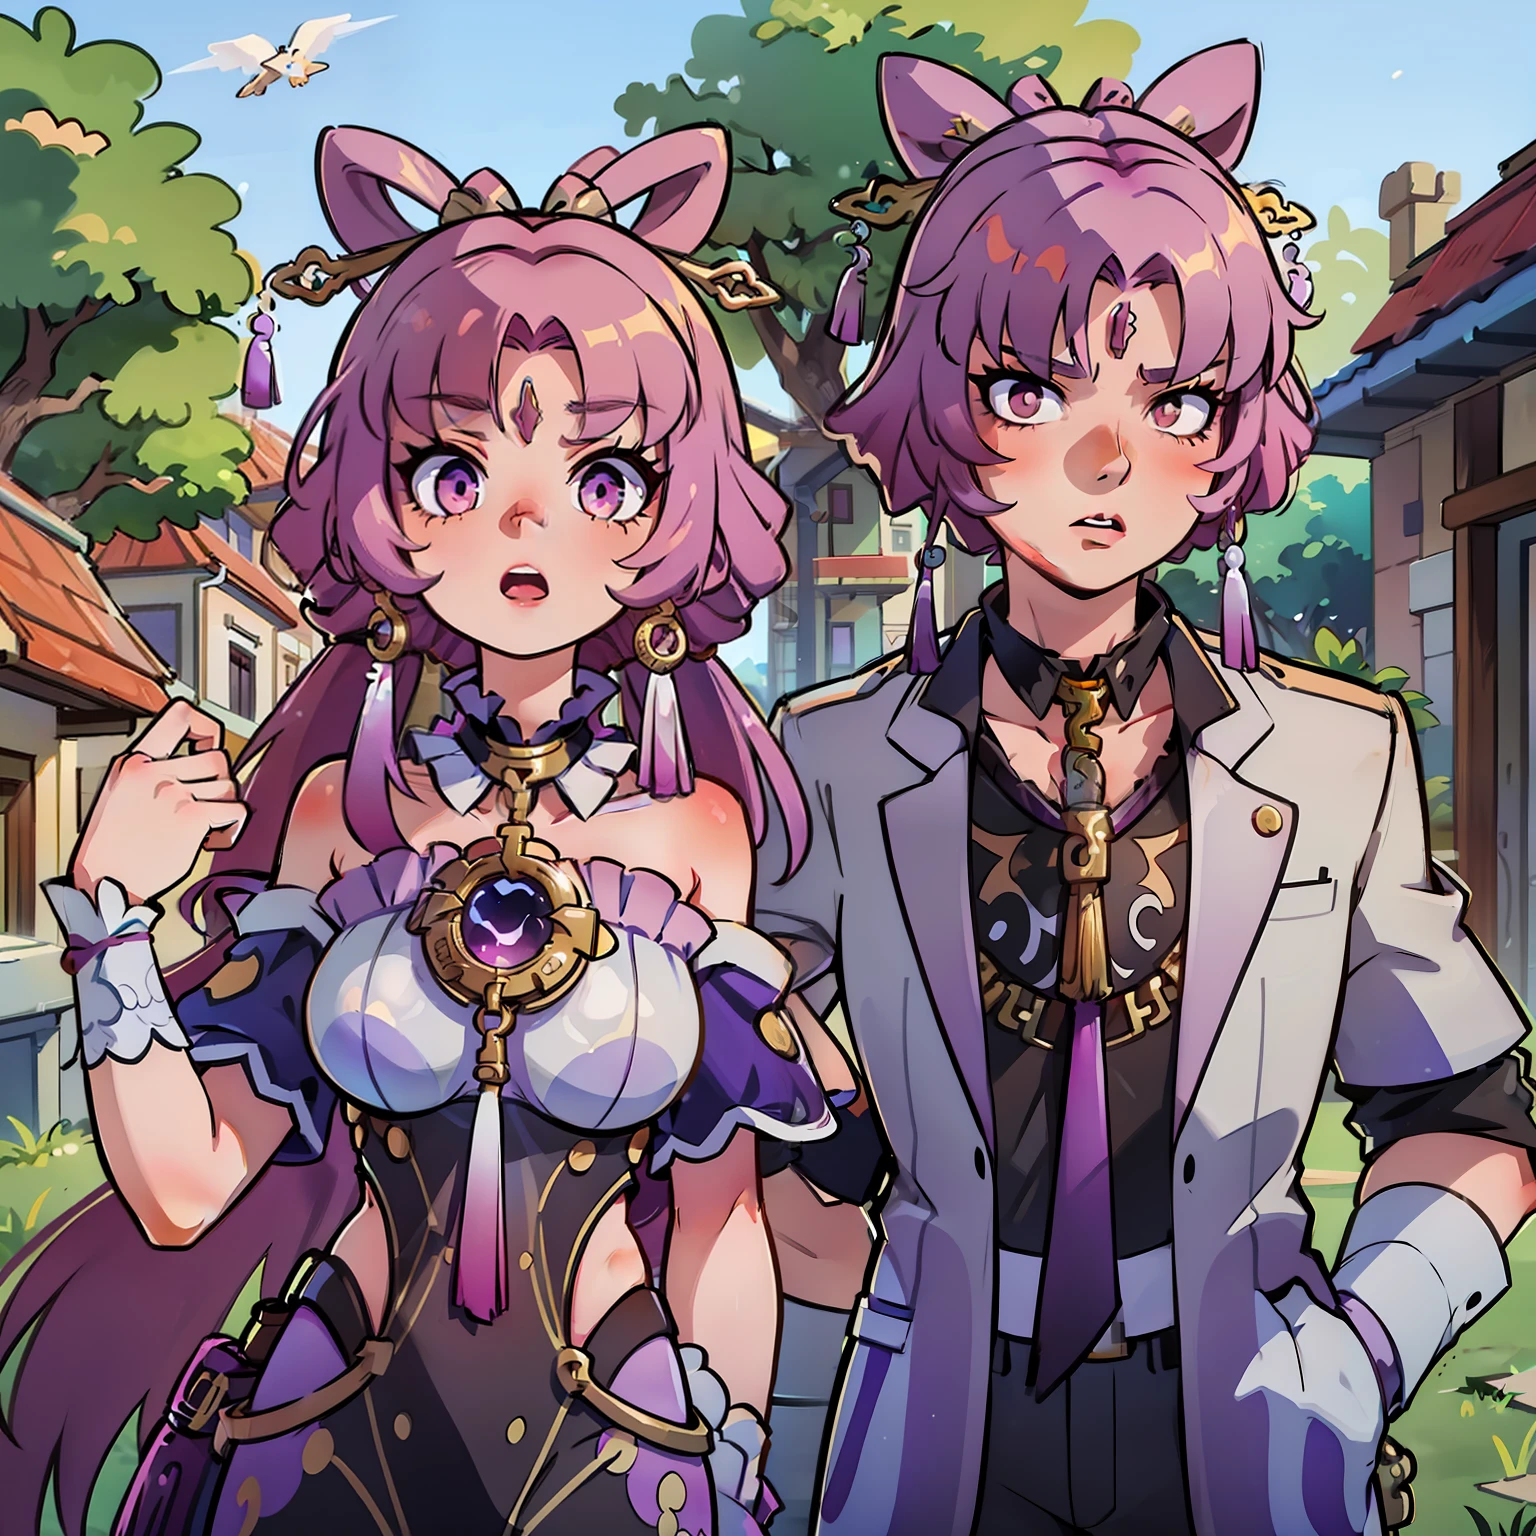 Two people, one male and one female, with cat ears and purple hair